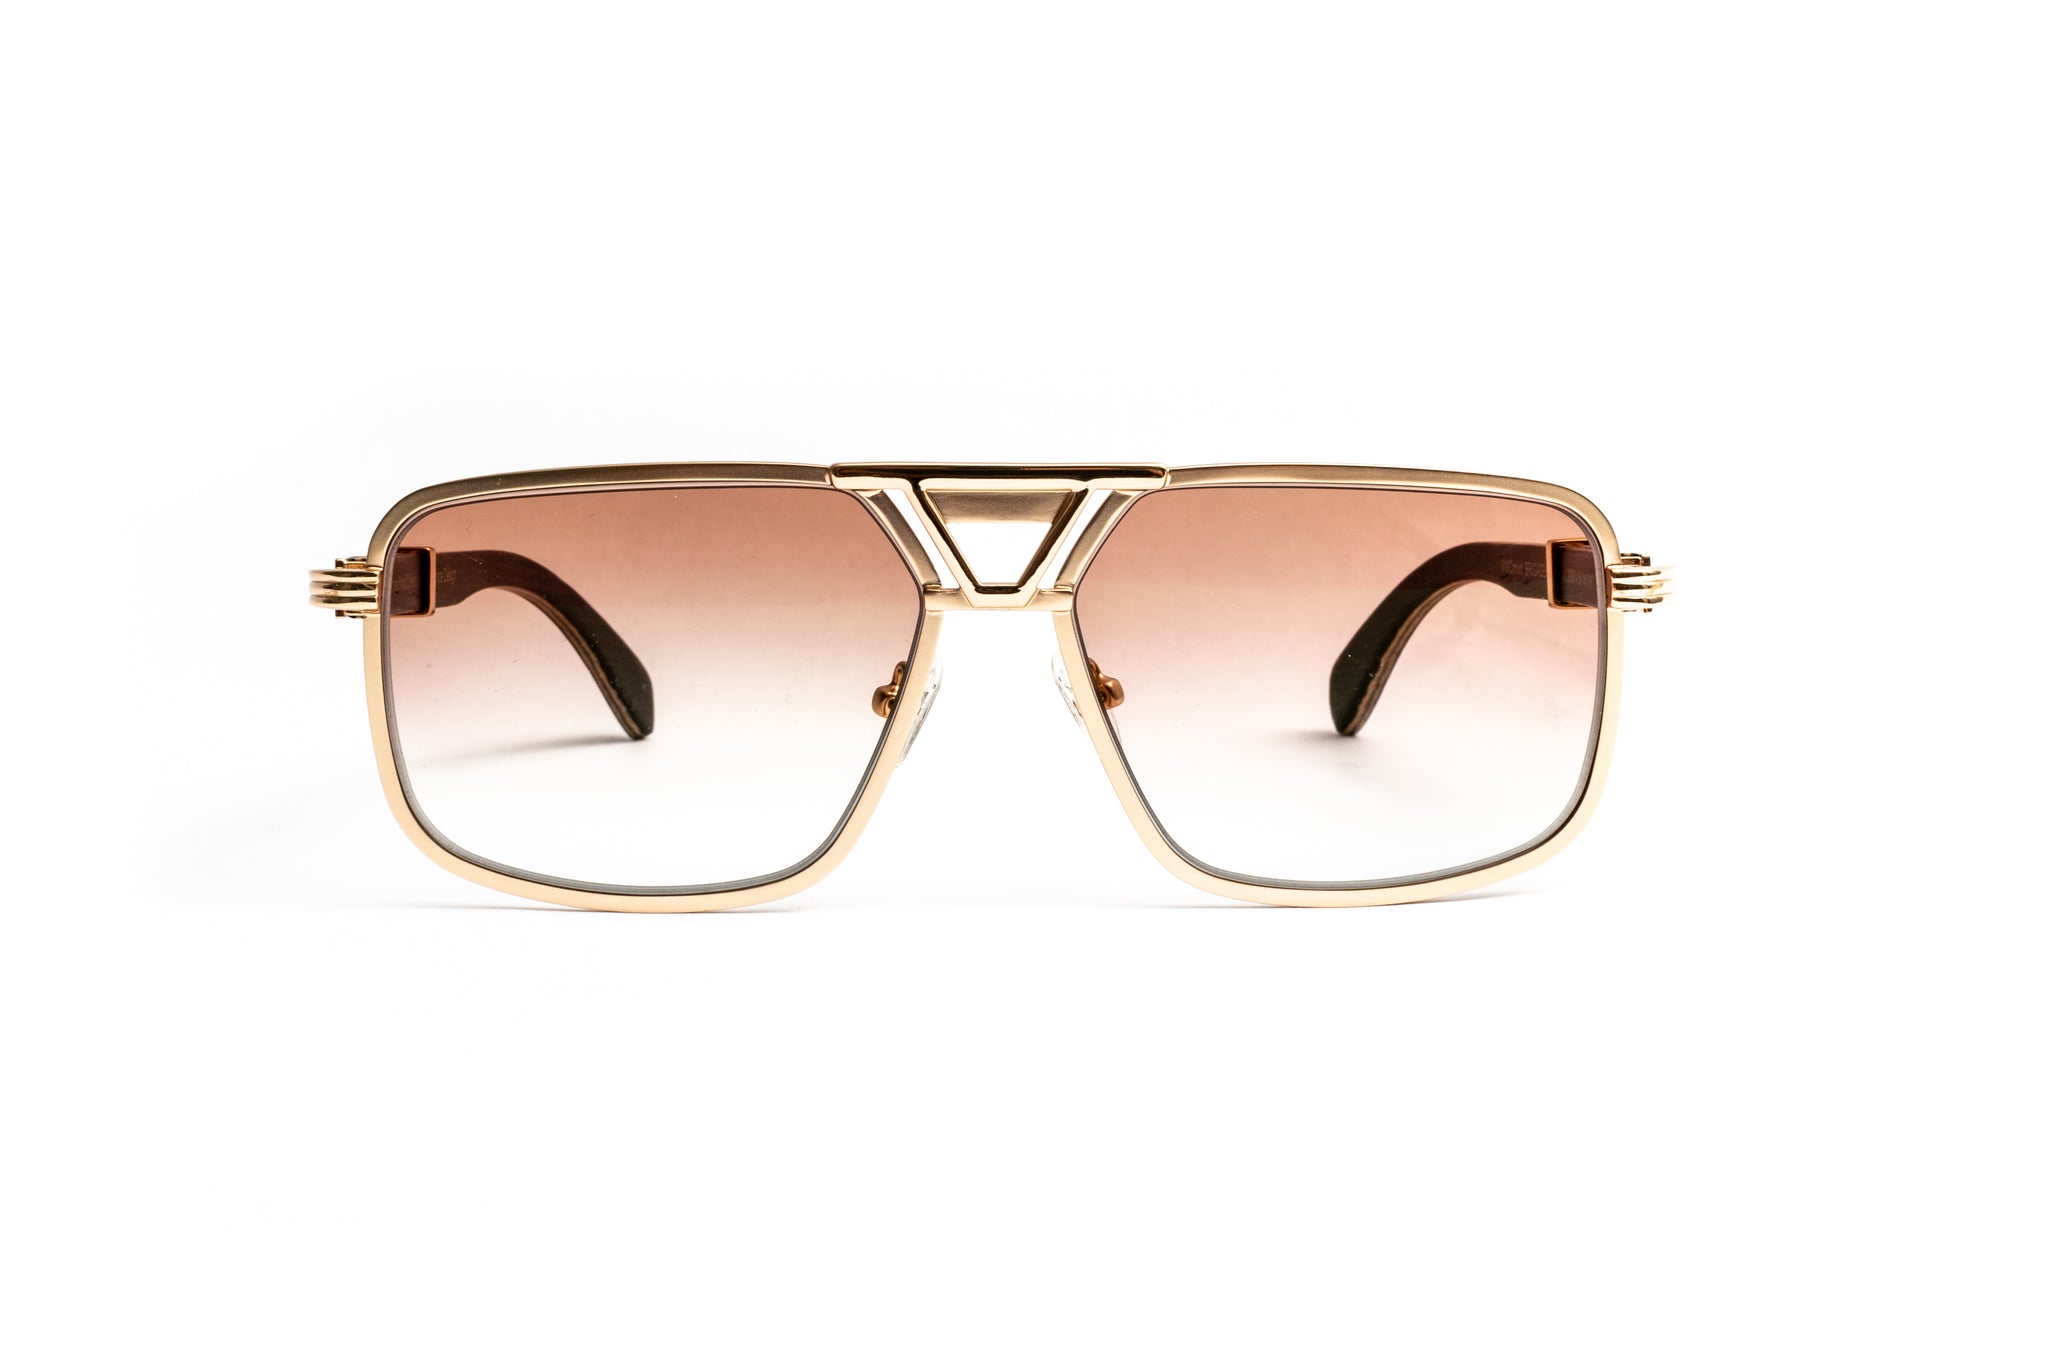 Premiere-de-Cartier style men's sunglasses made from 18kt gold and dark brown wood with gradient brown lenses by Vintage Wood Collection